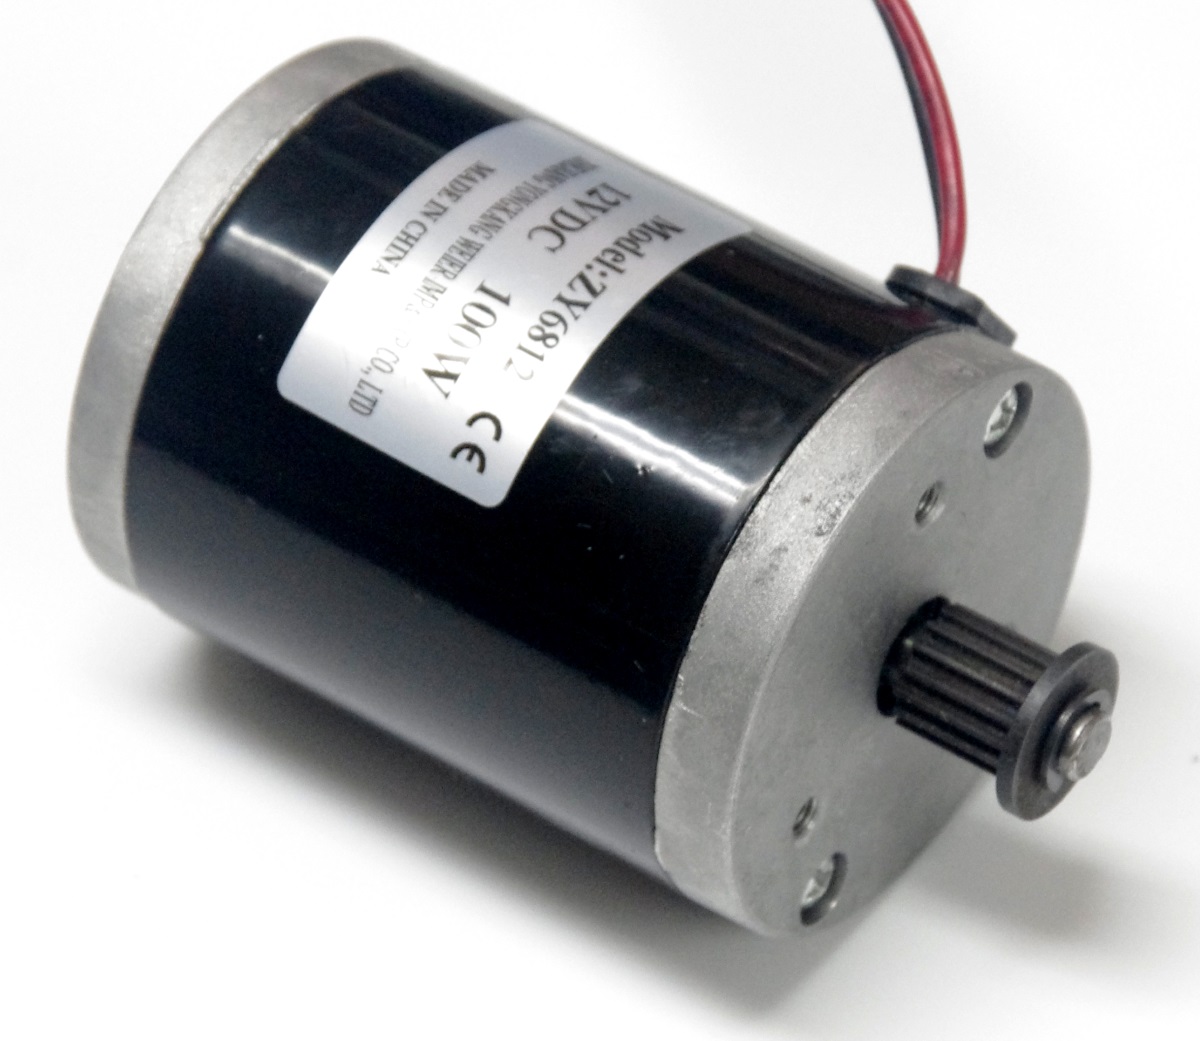 United MY6812 24V DC 150W Electric Motor (Belt Drive) - Reliable Power ...